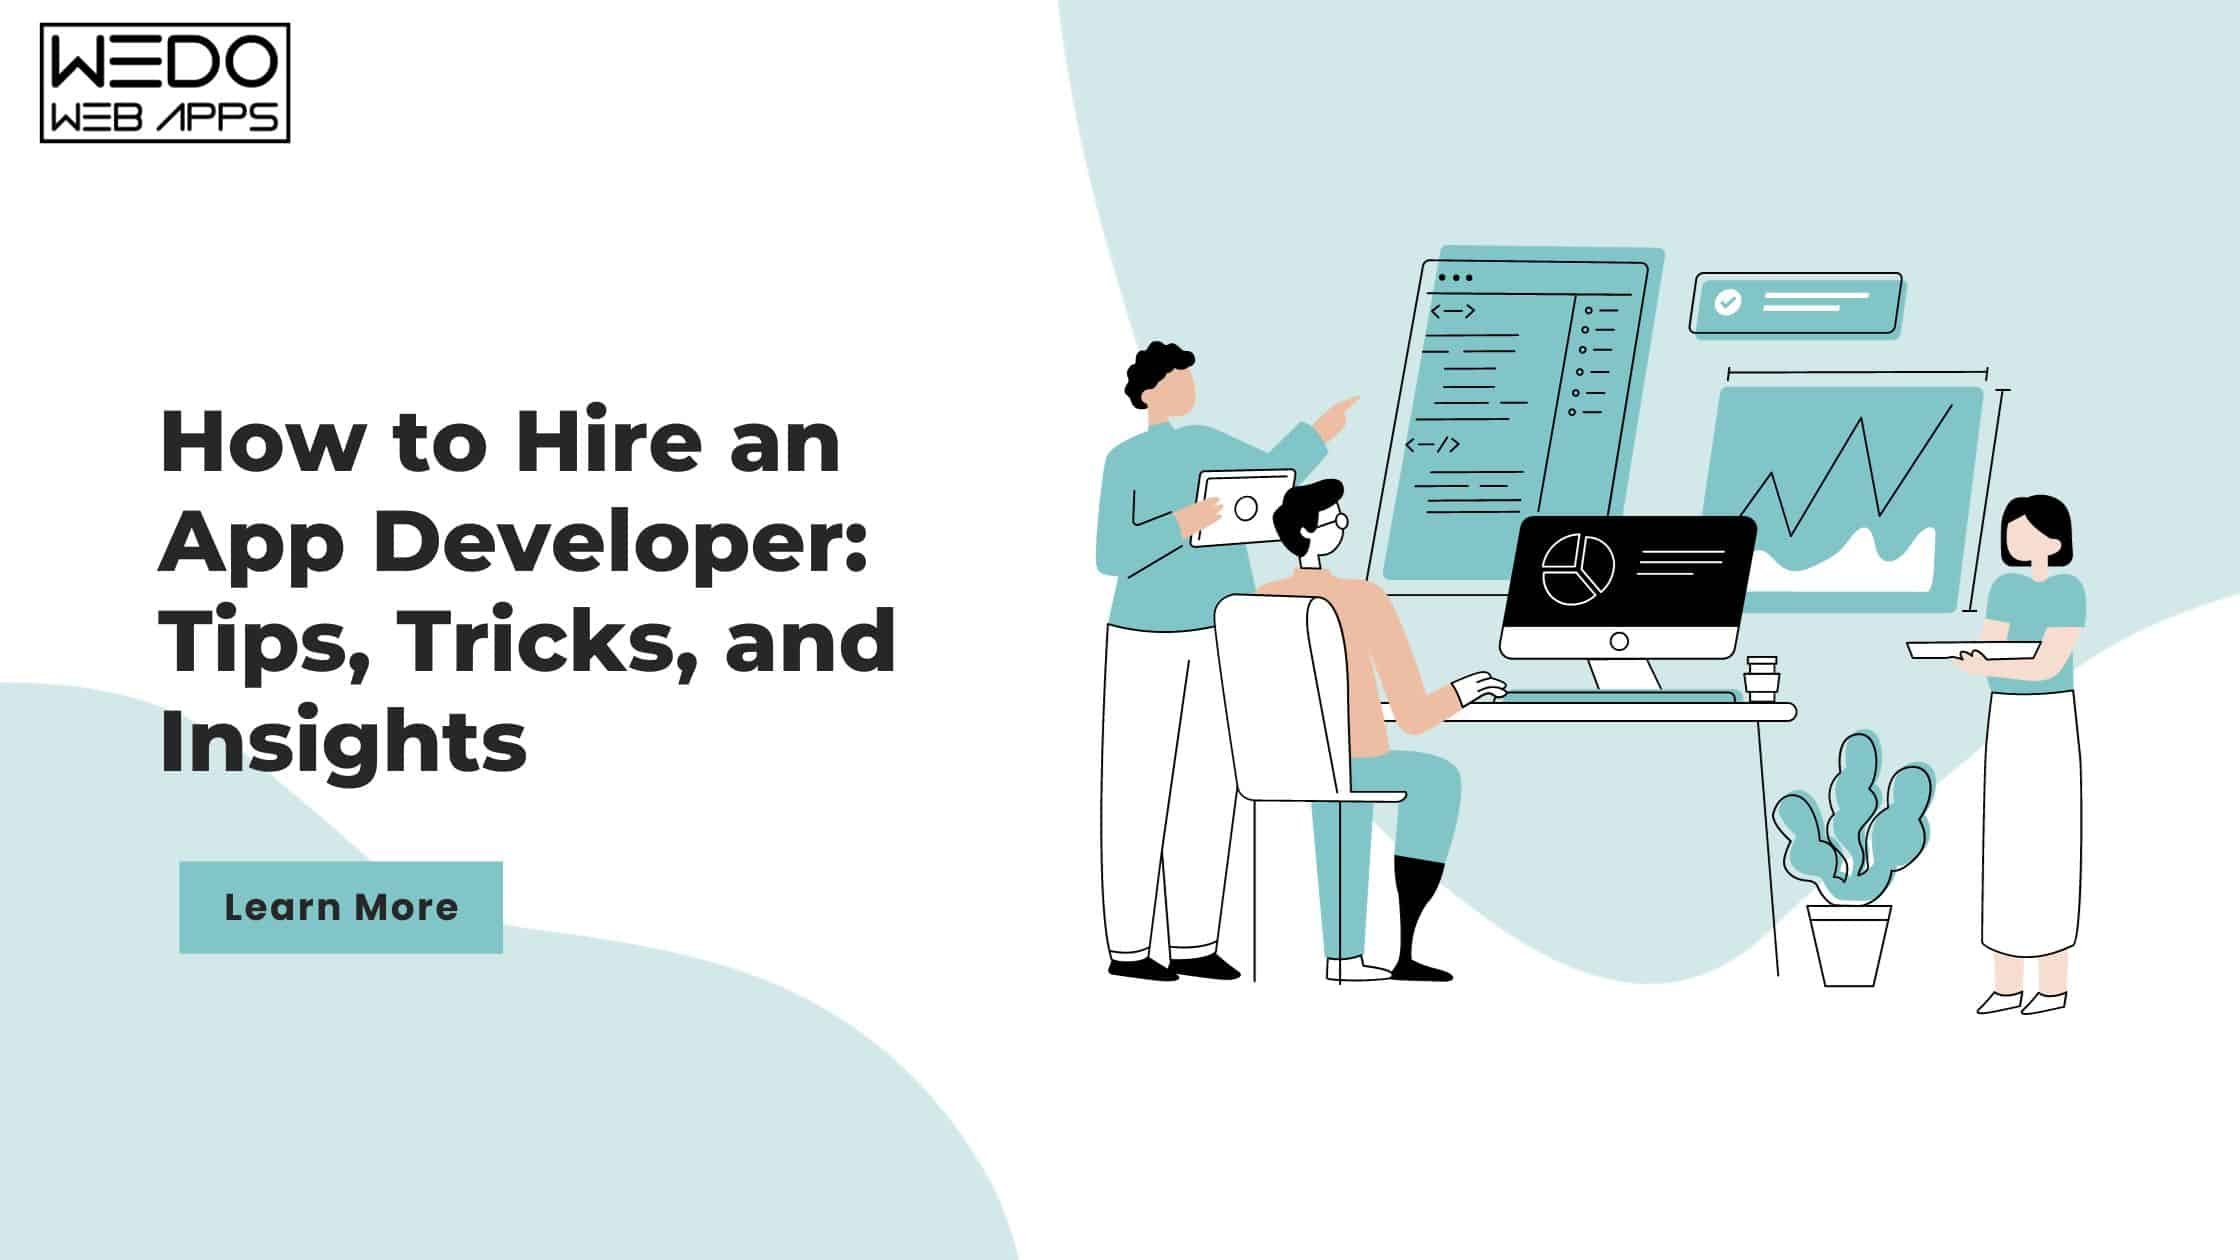 How to Hire an App Developer: Your Comprehensive Guide to Tips, Tricks, and Insights